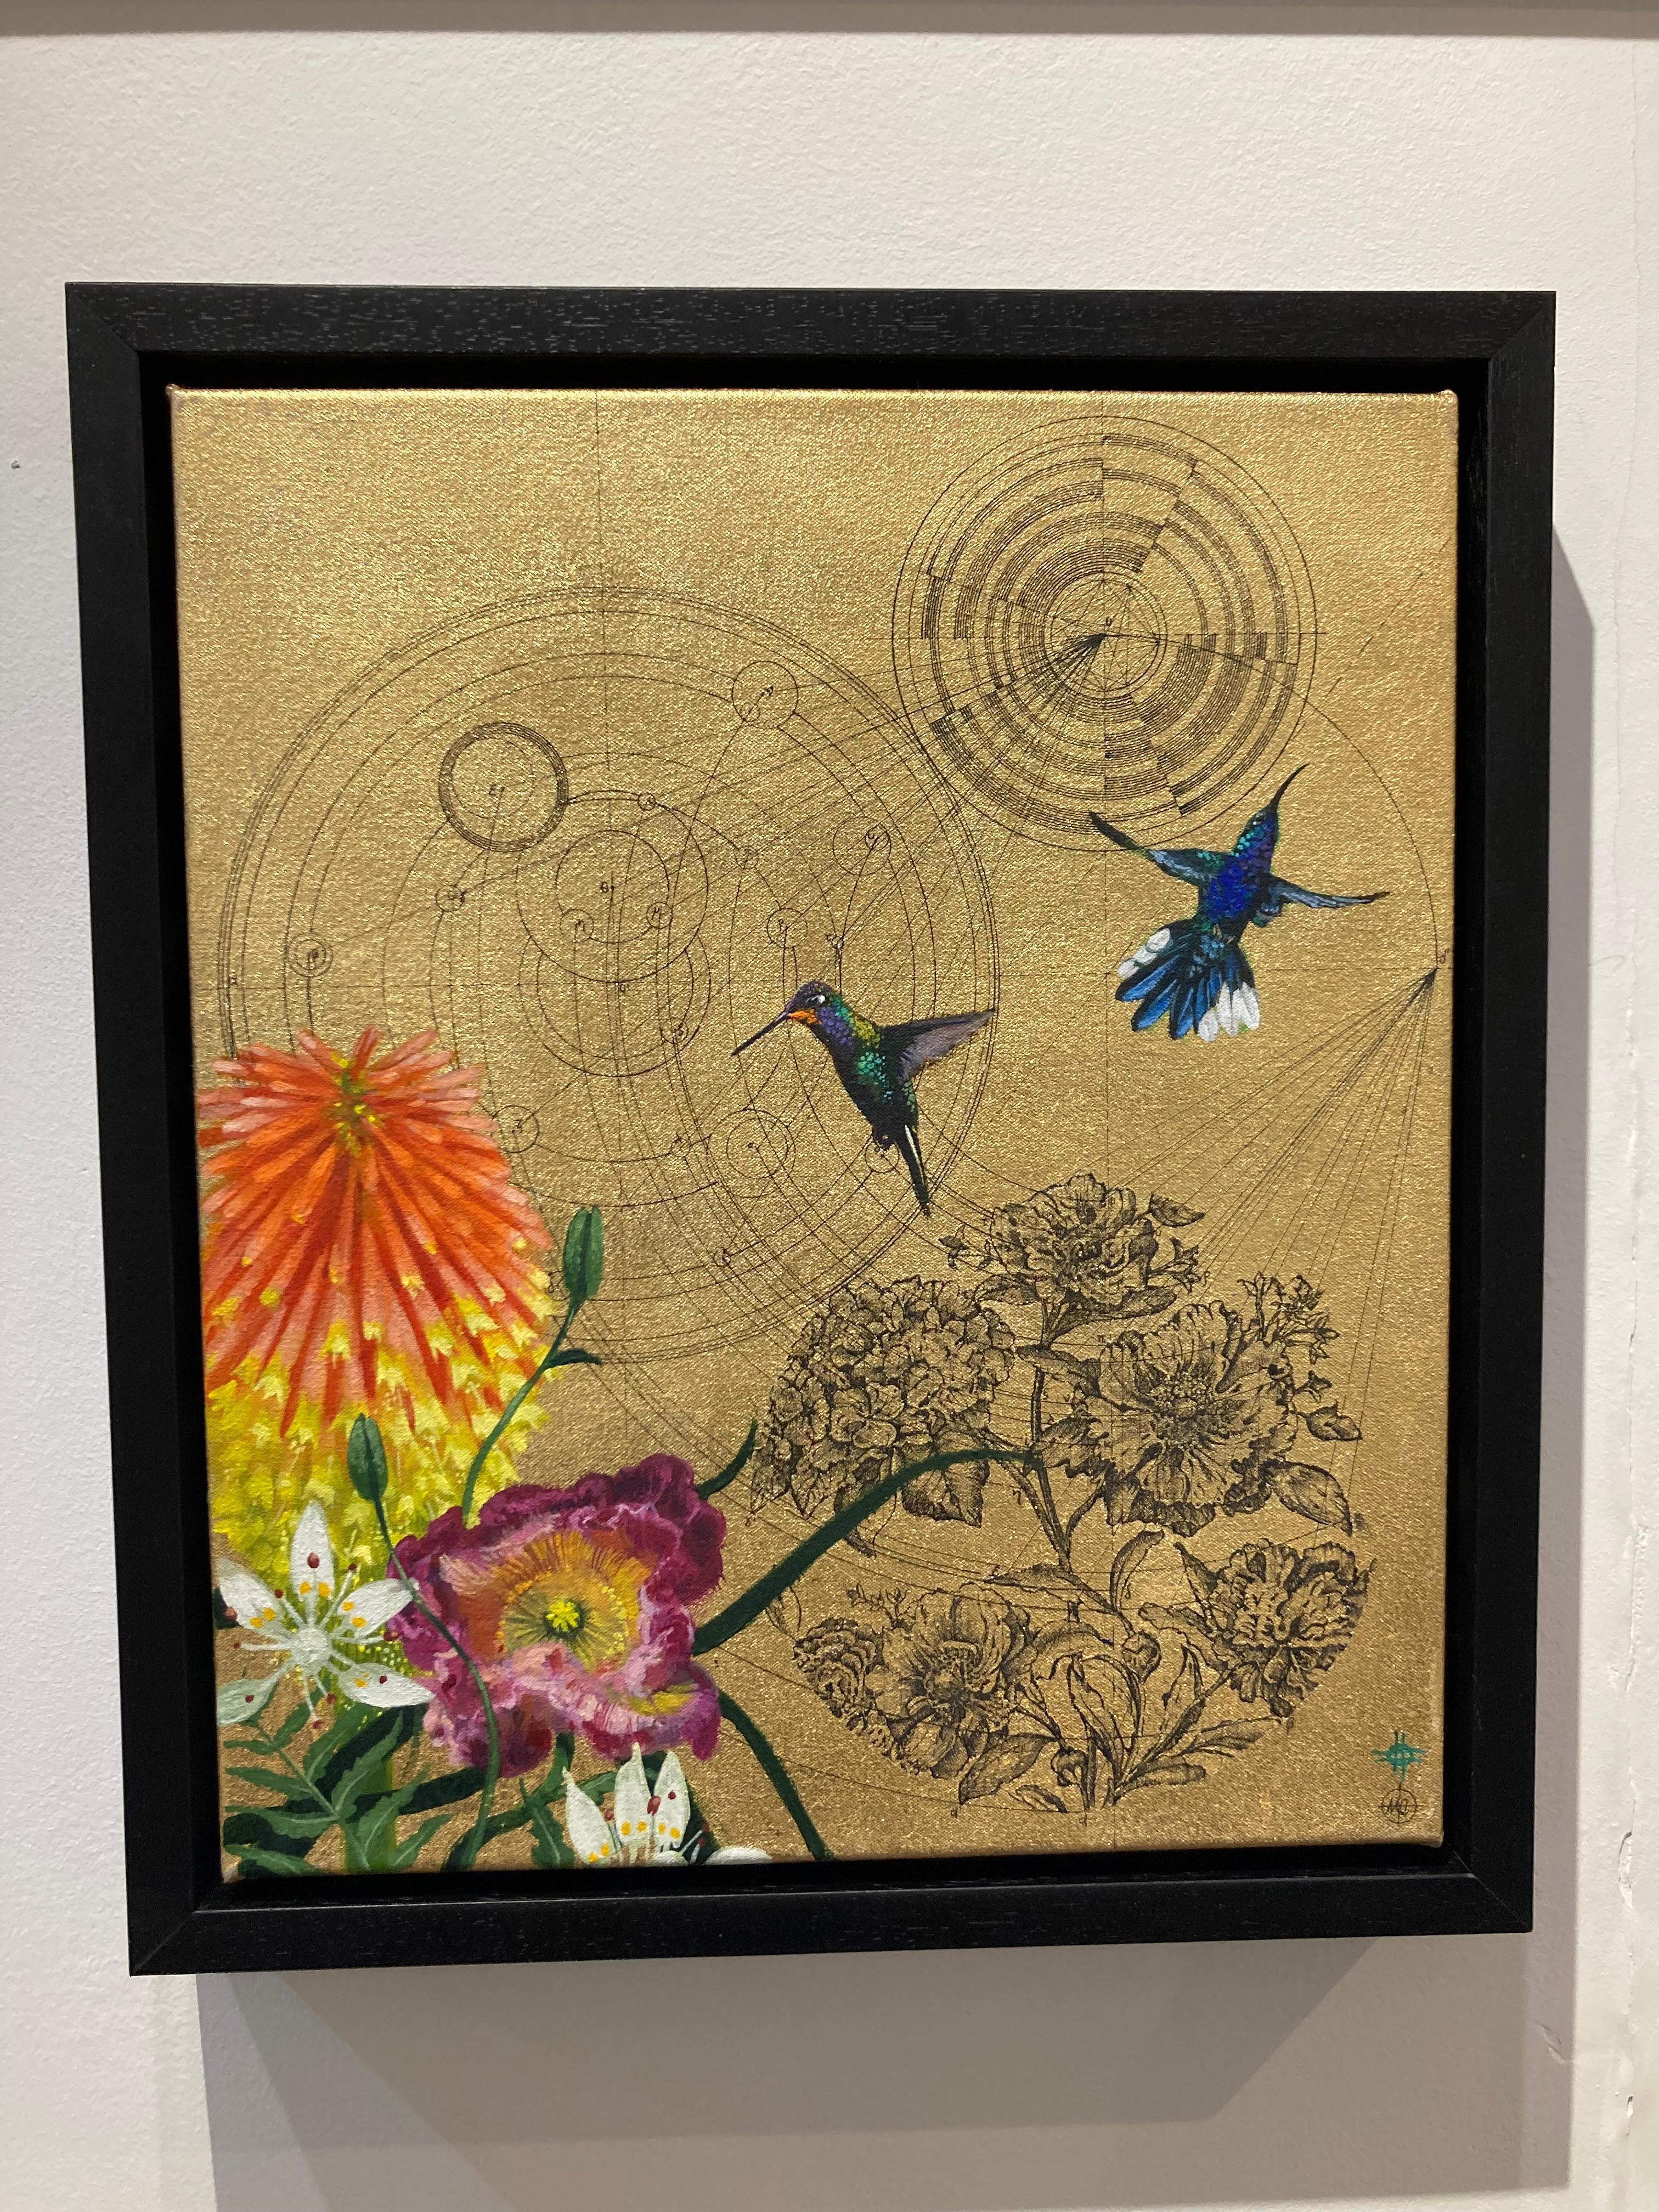 Aurum 6 - contemporary mixed media painting, Floral Gold Geometry Birds - Painting by Keng Wai Lee & Marco Araldi